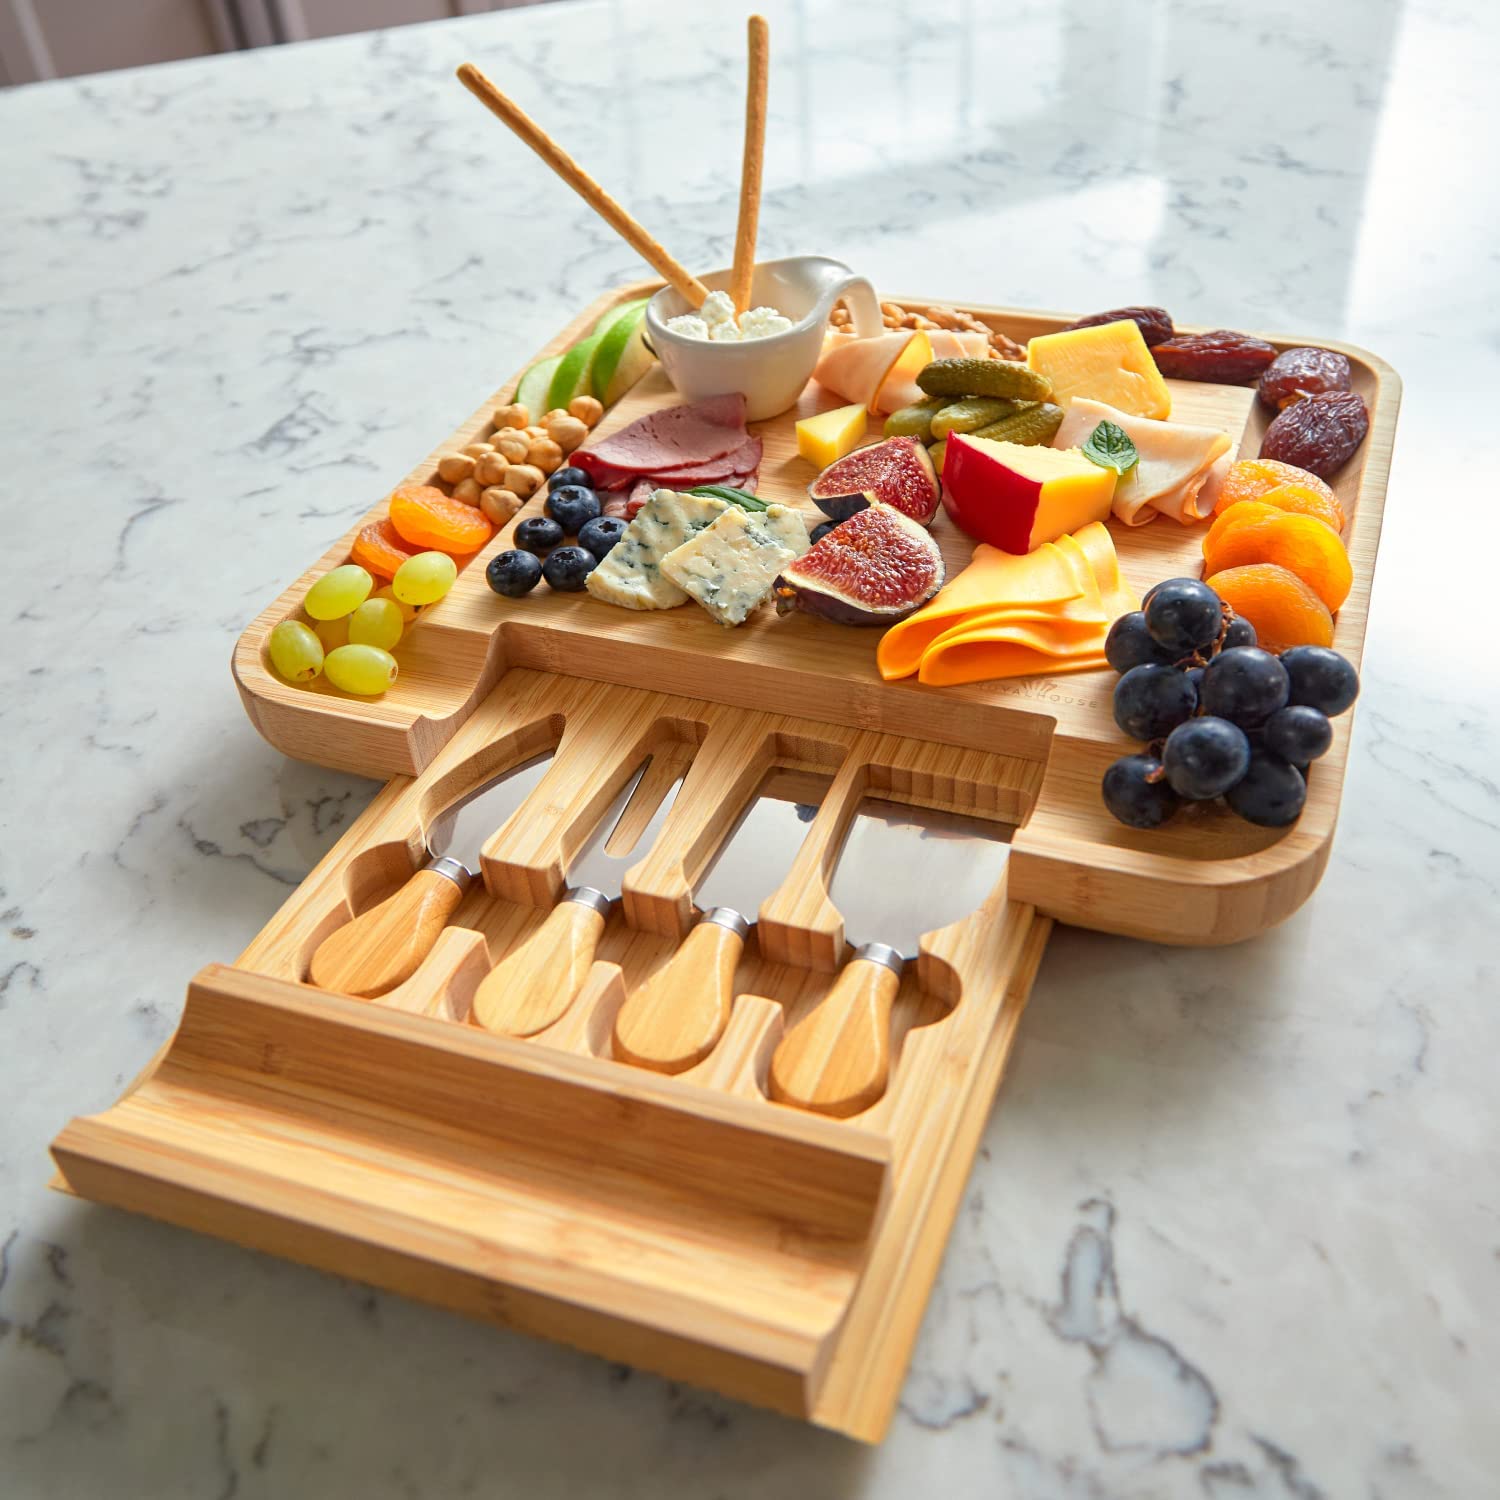 heese board and knife set with slide-out cutlery drawer. On the board are various different foods including, cheeses and fruits.